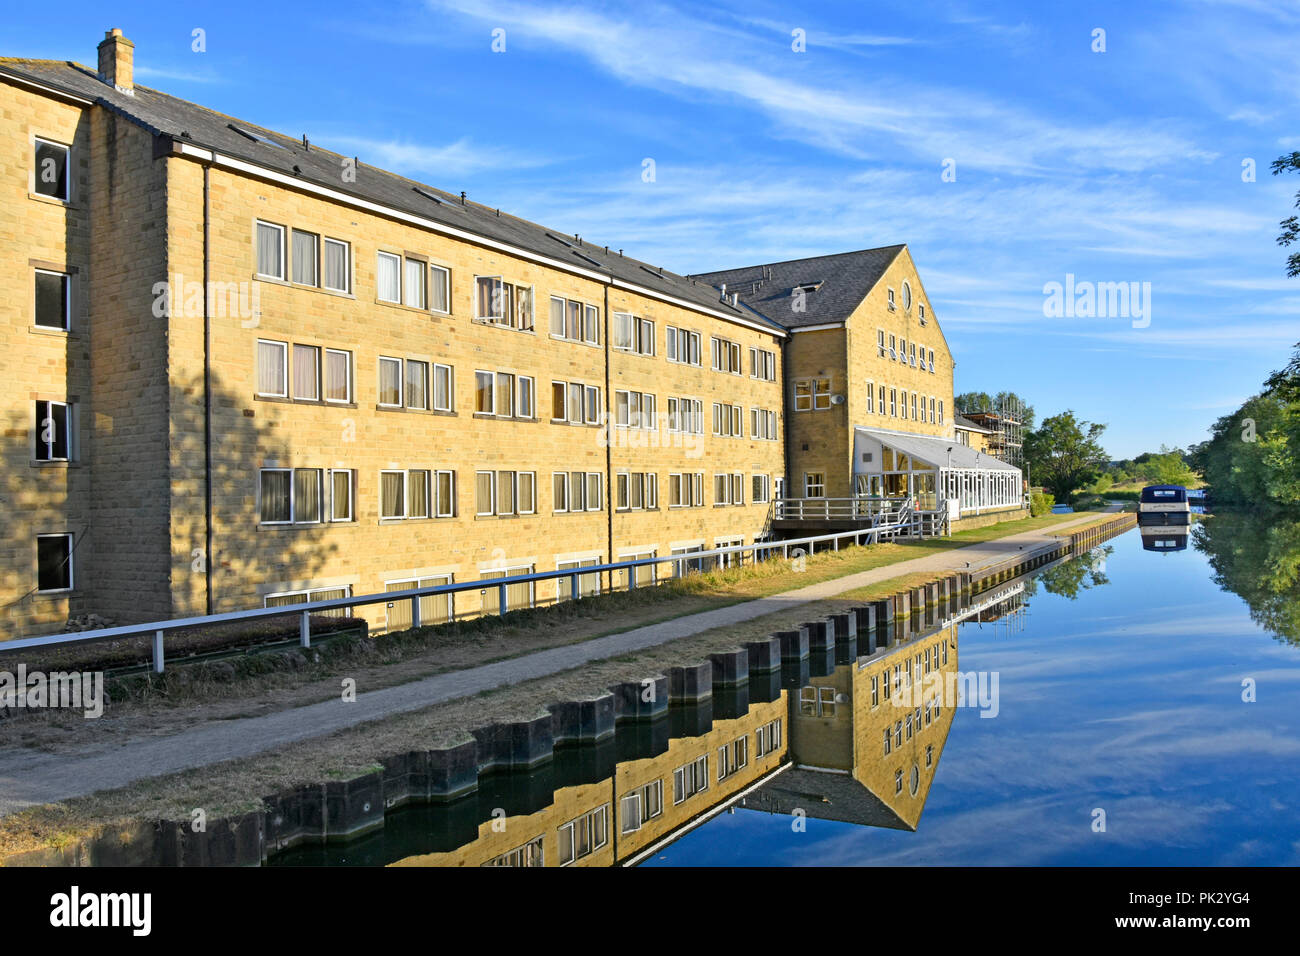 Rendezvous Hotel & restaurant conservatory reflection in still water of Leeds Liverpool Canal Skipton Gateway to the Dales North Yorkshire England UK Stock Photo